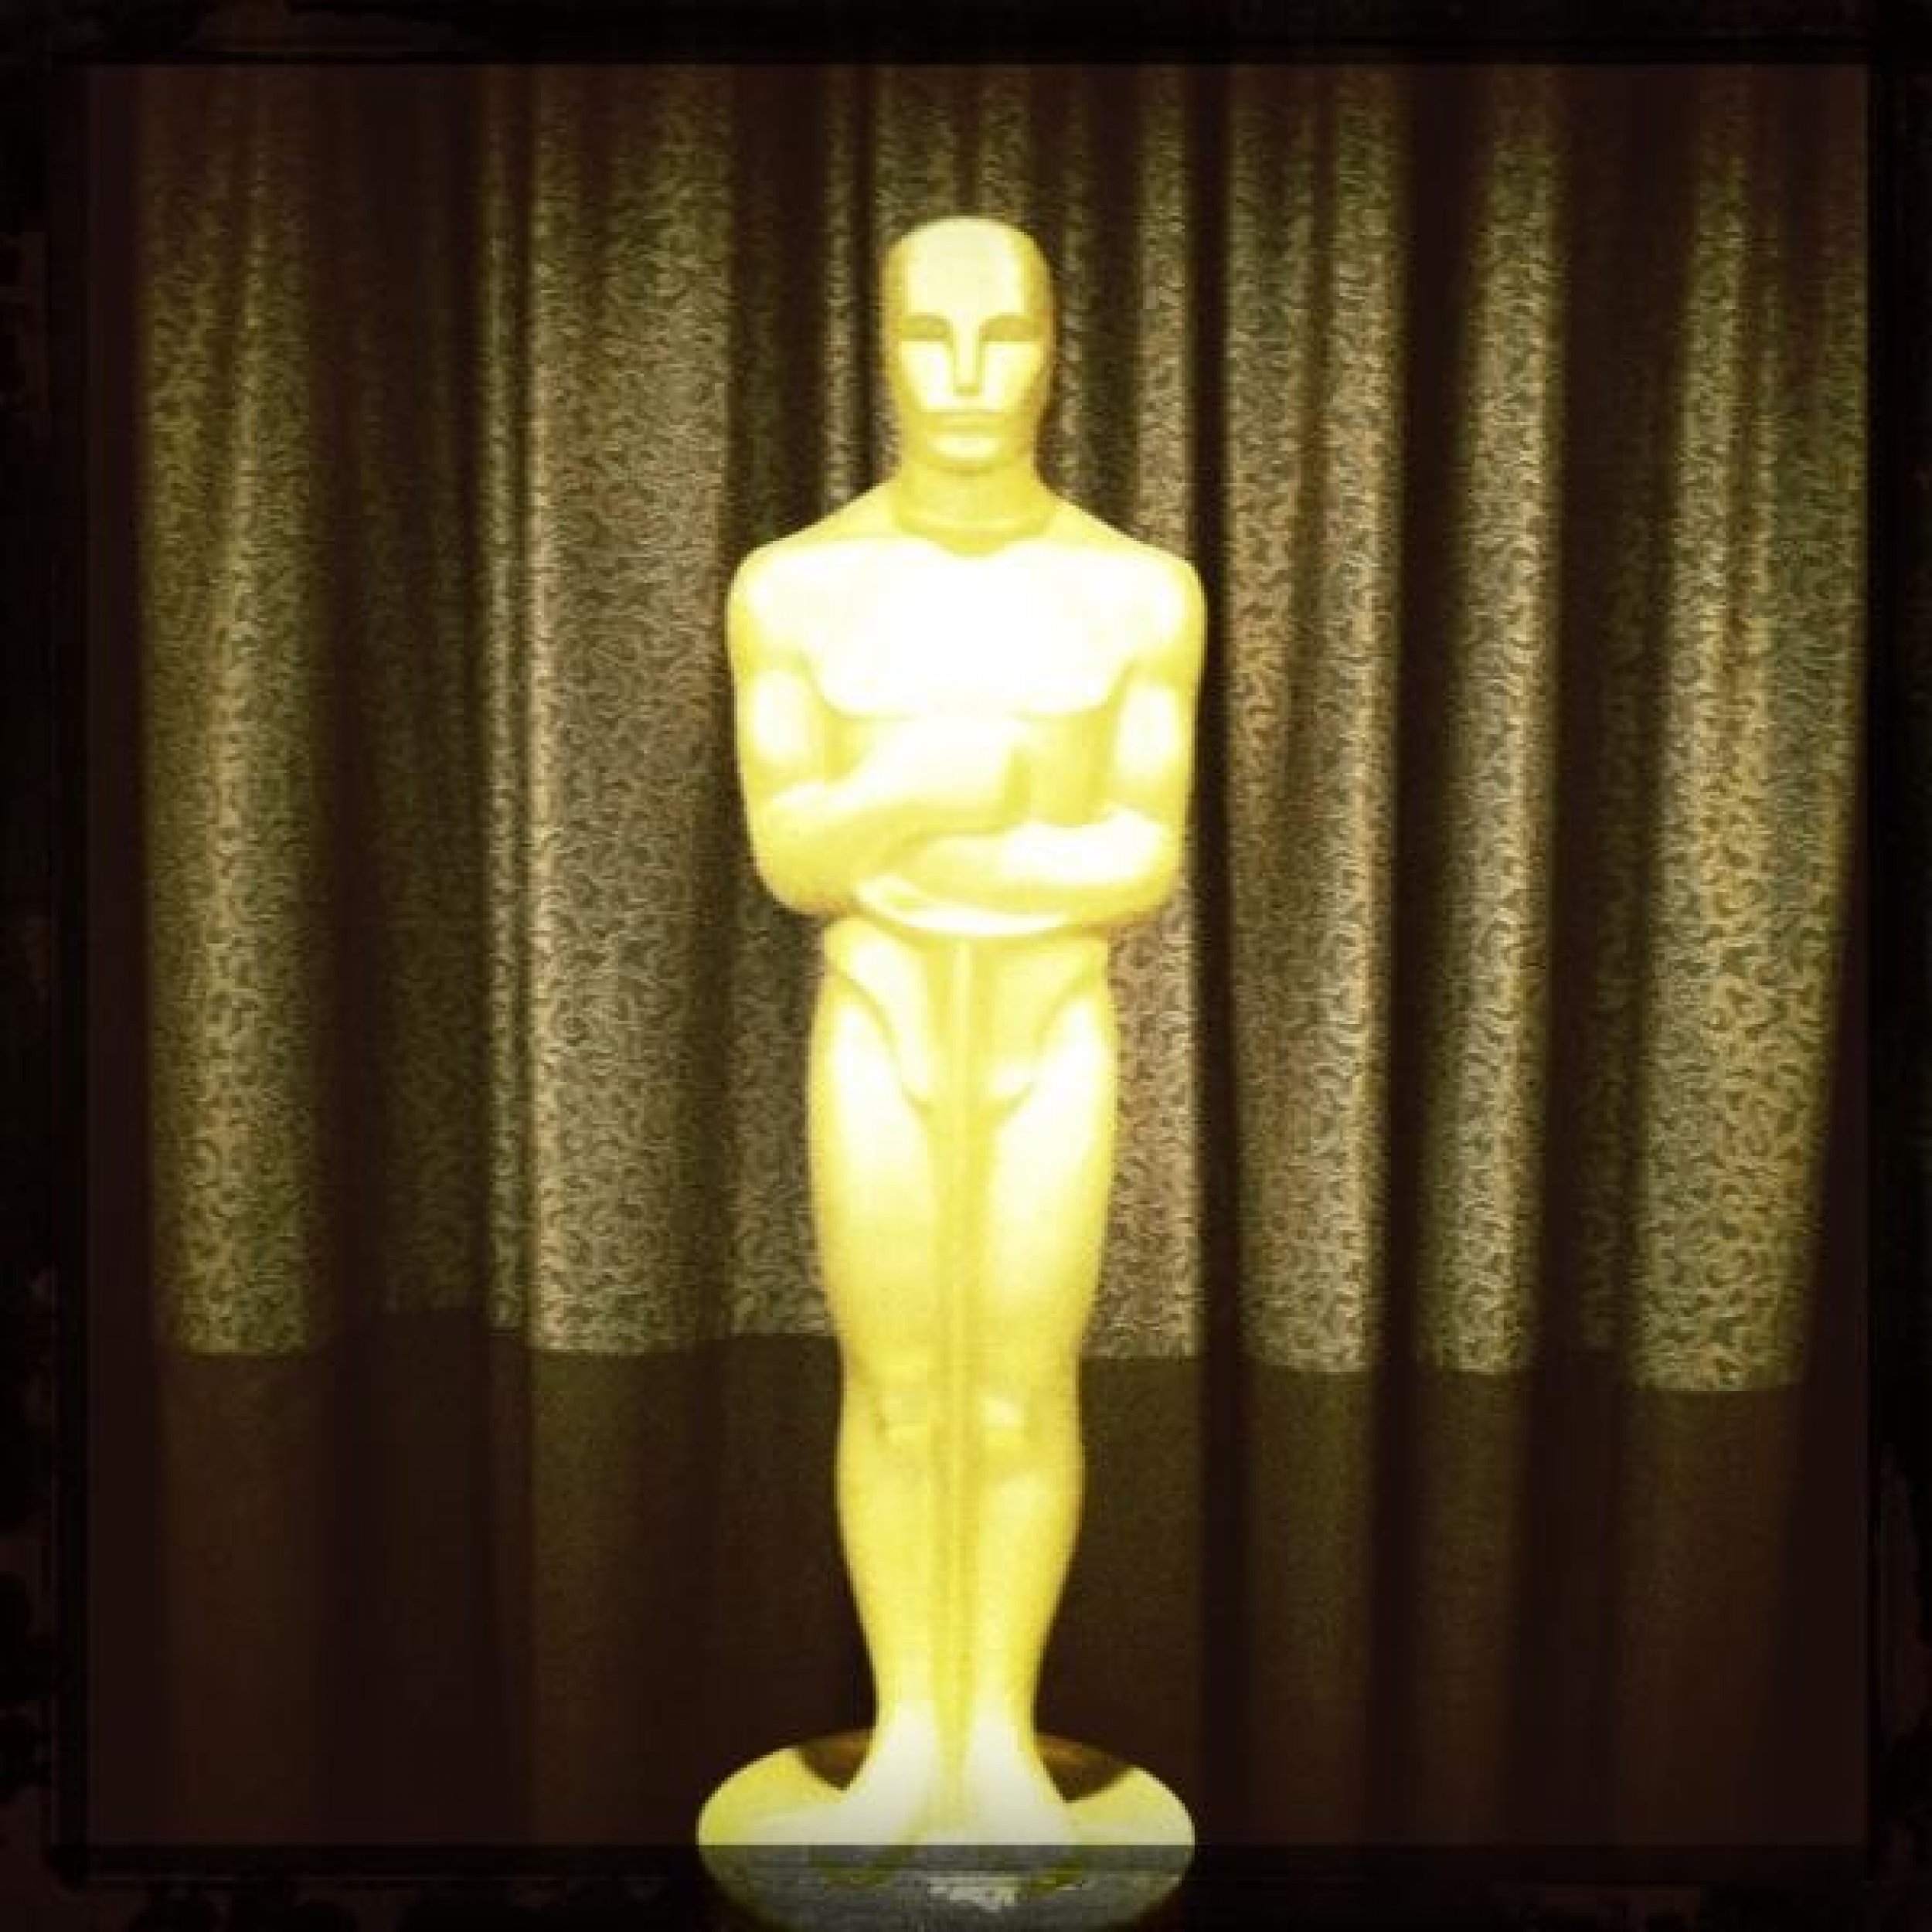 Oscars 2012 Watch the Trailers Here